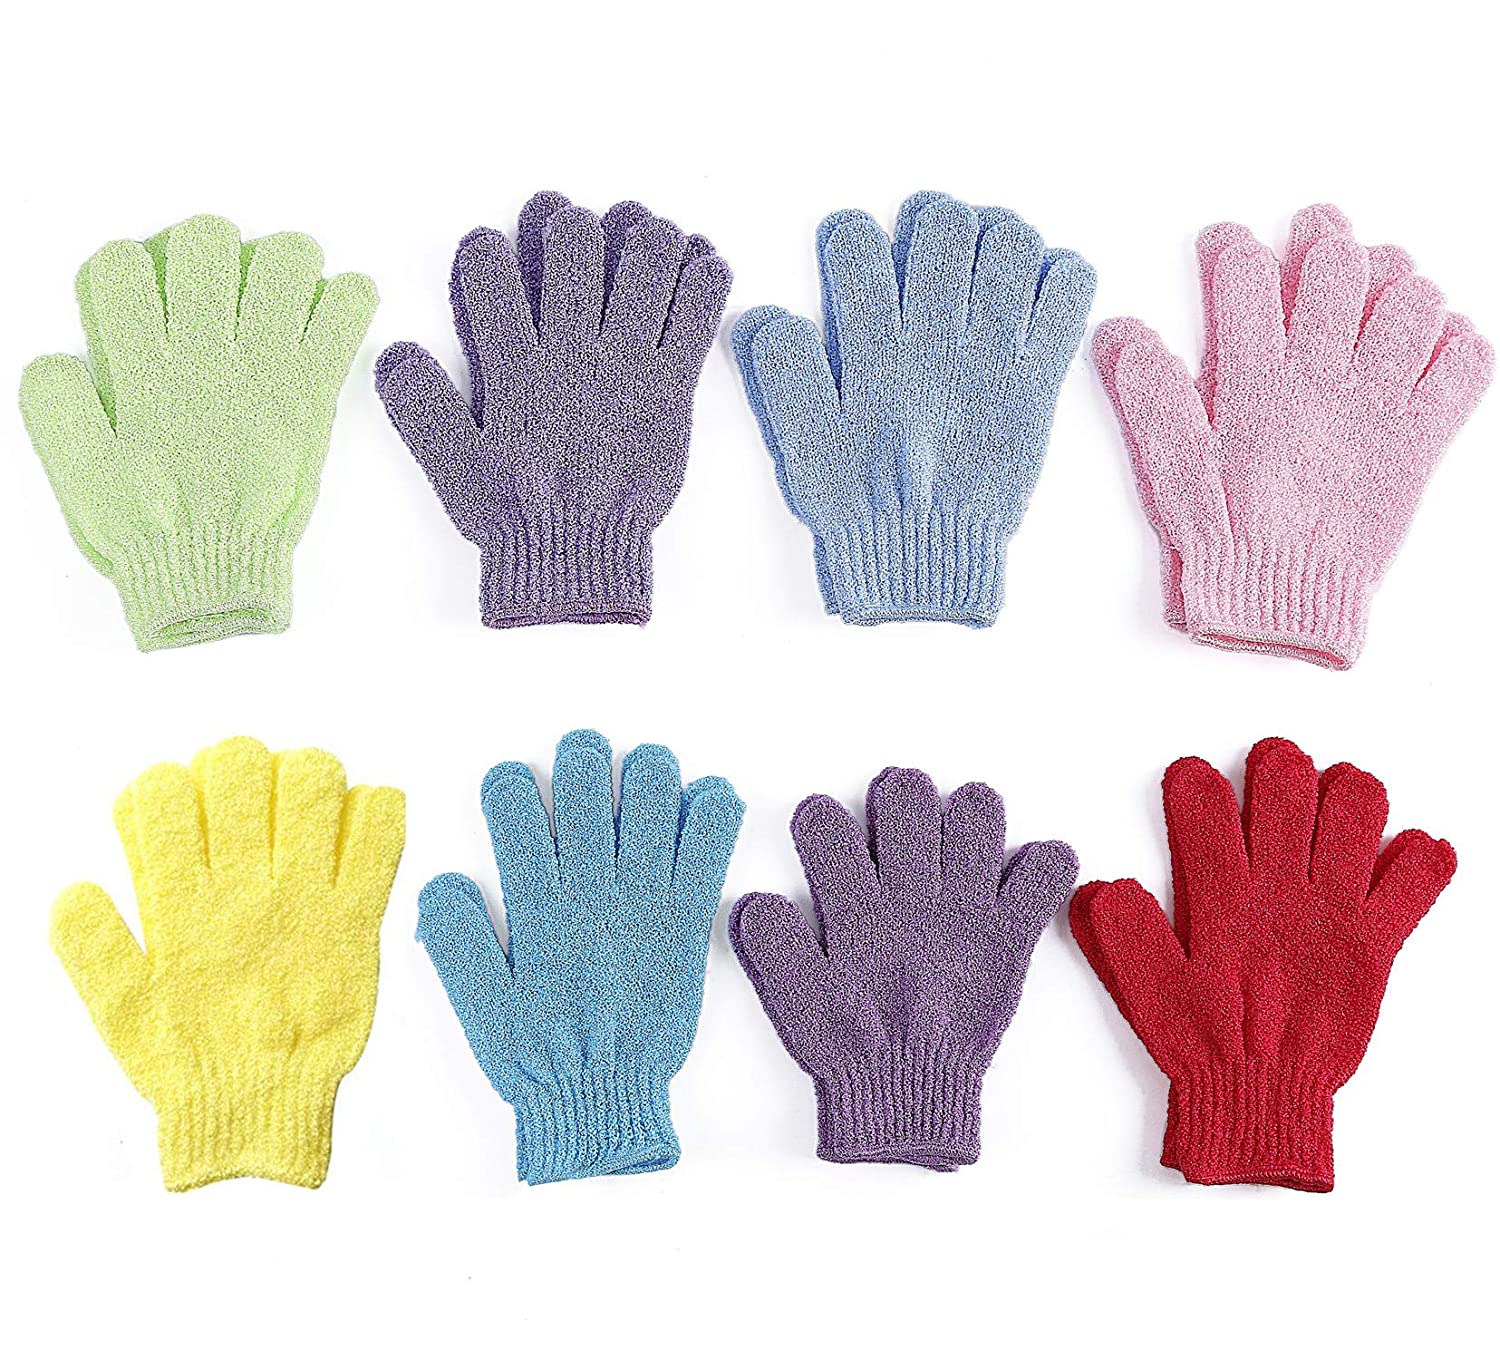 Mooerca Double Sided Exfoliating Body Scrubbing Gloves, 8-Pack